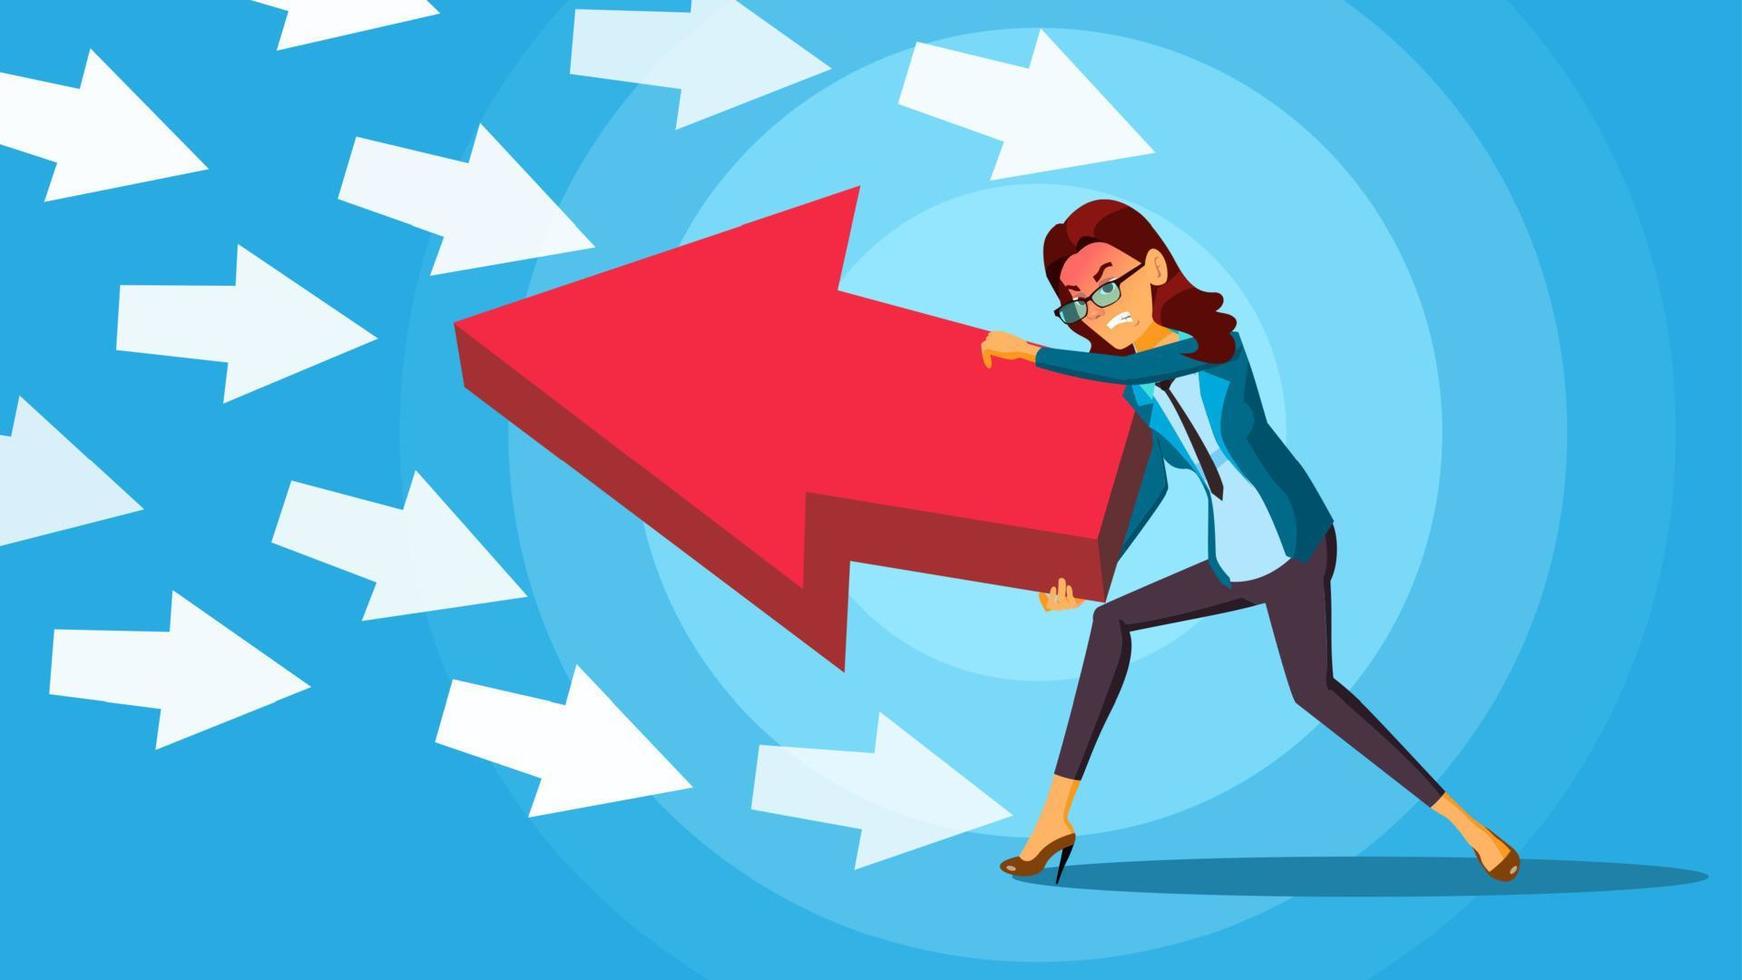 Business Woman Pushing Arrow Vector. Opponent Concept. Opposite Direction. Standing Out From The Crowd. Against Obstacles. Cartoon illustration vector